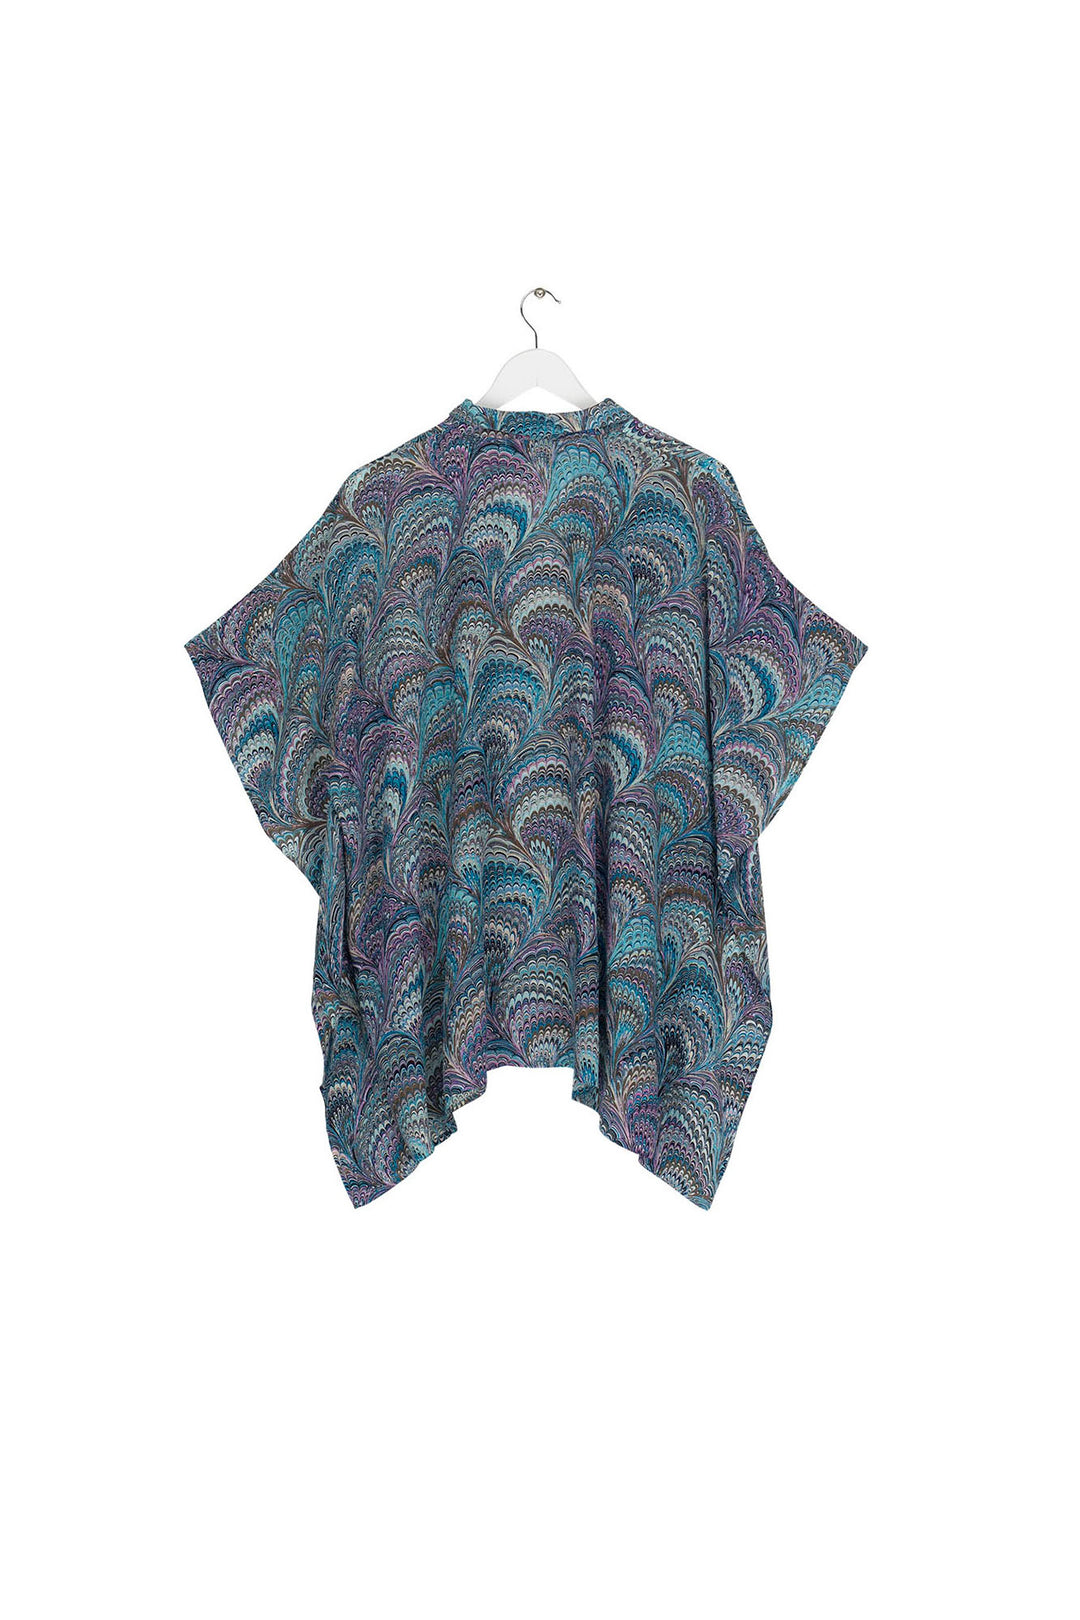 Marbled Blue Tunic Top - One Hundred Stars